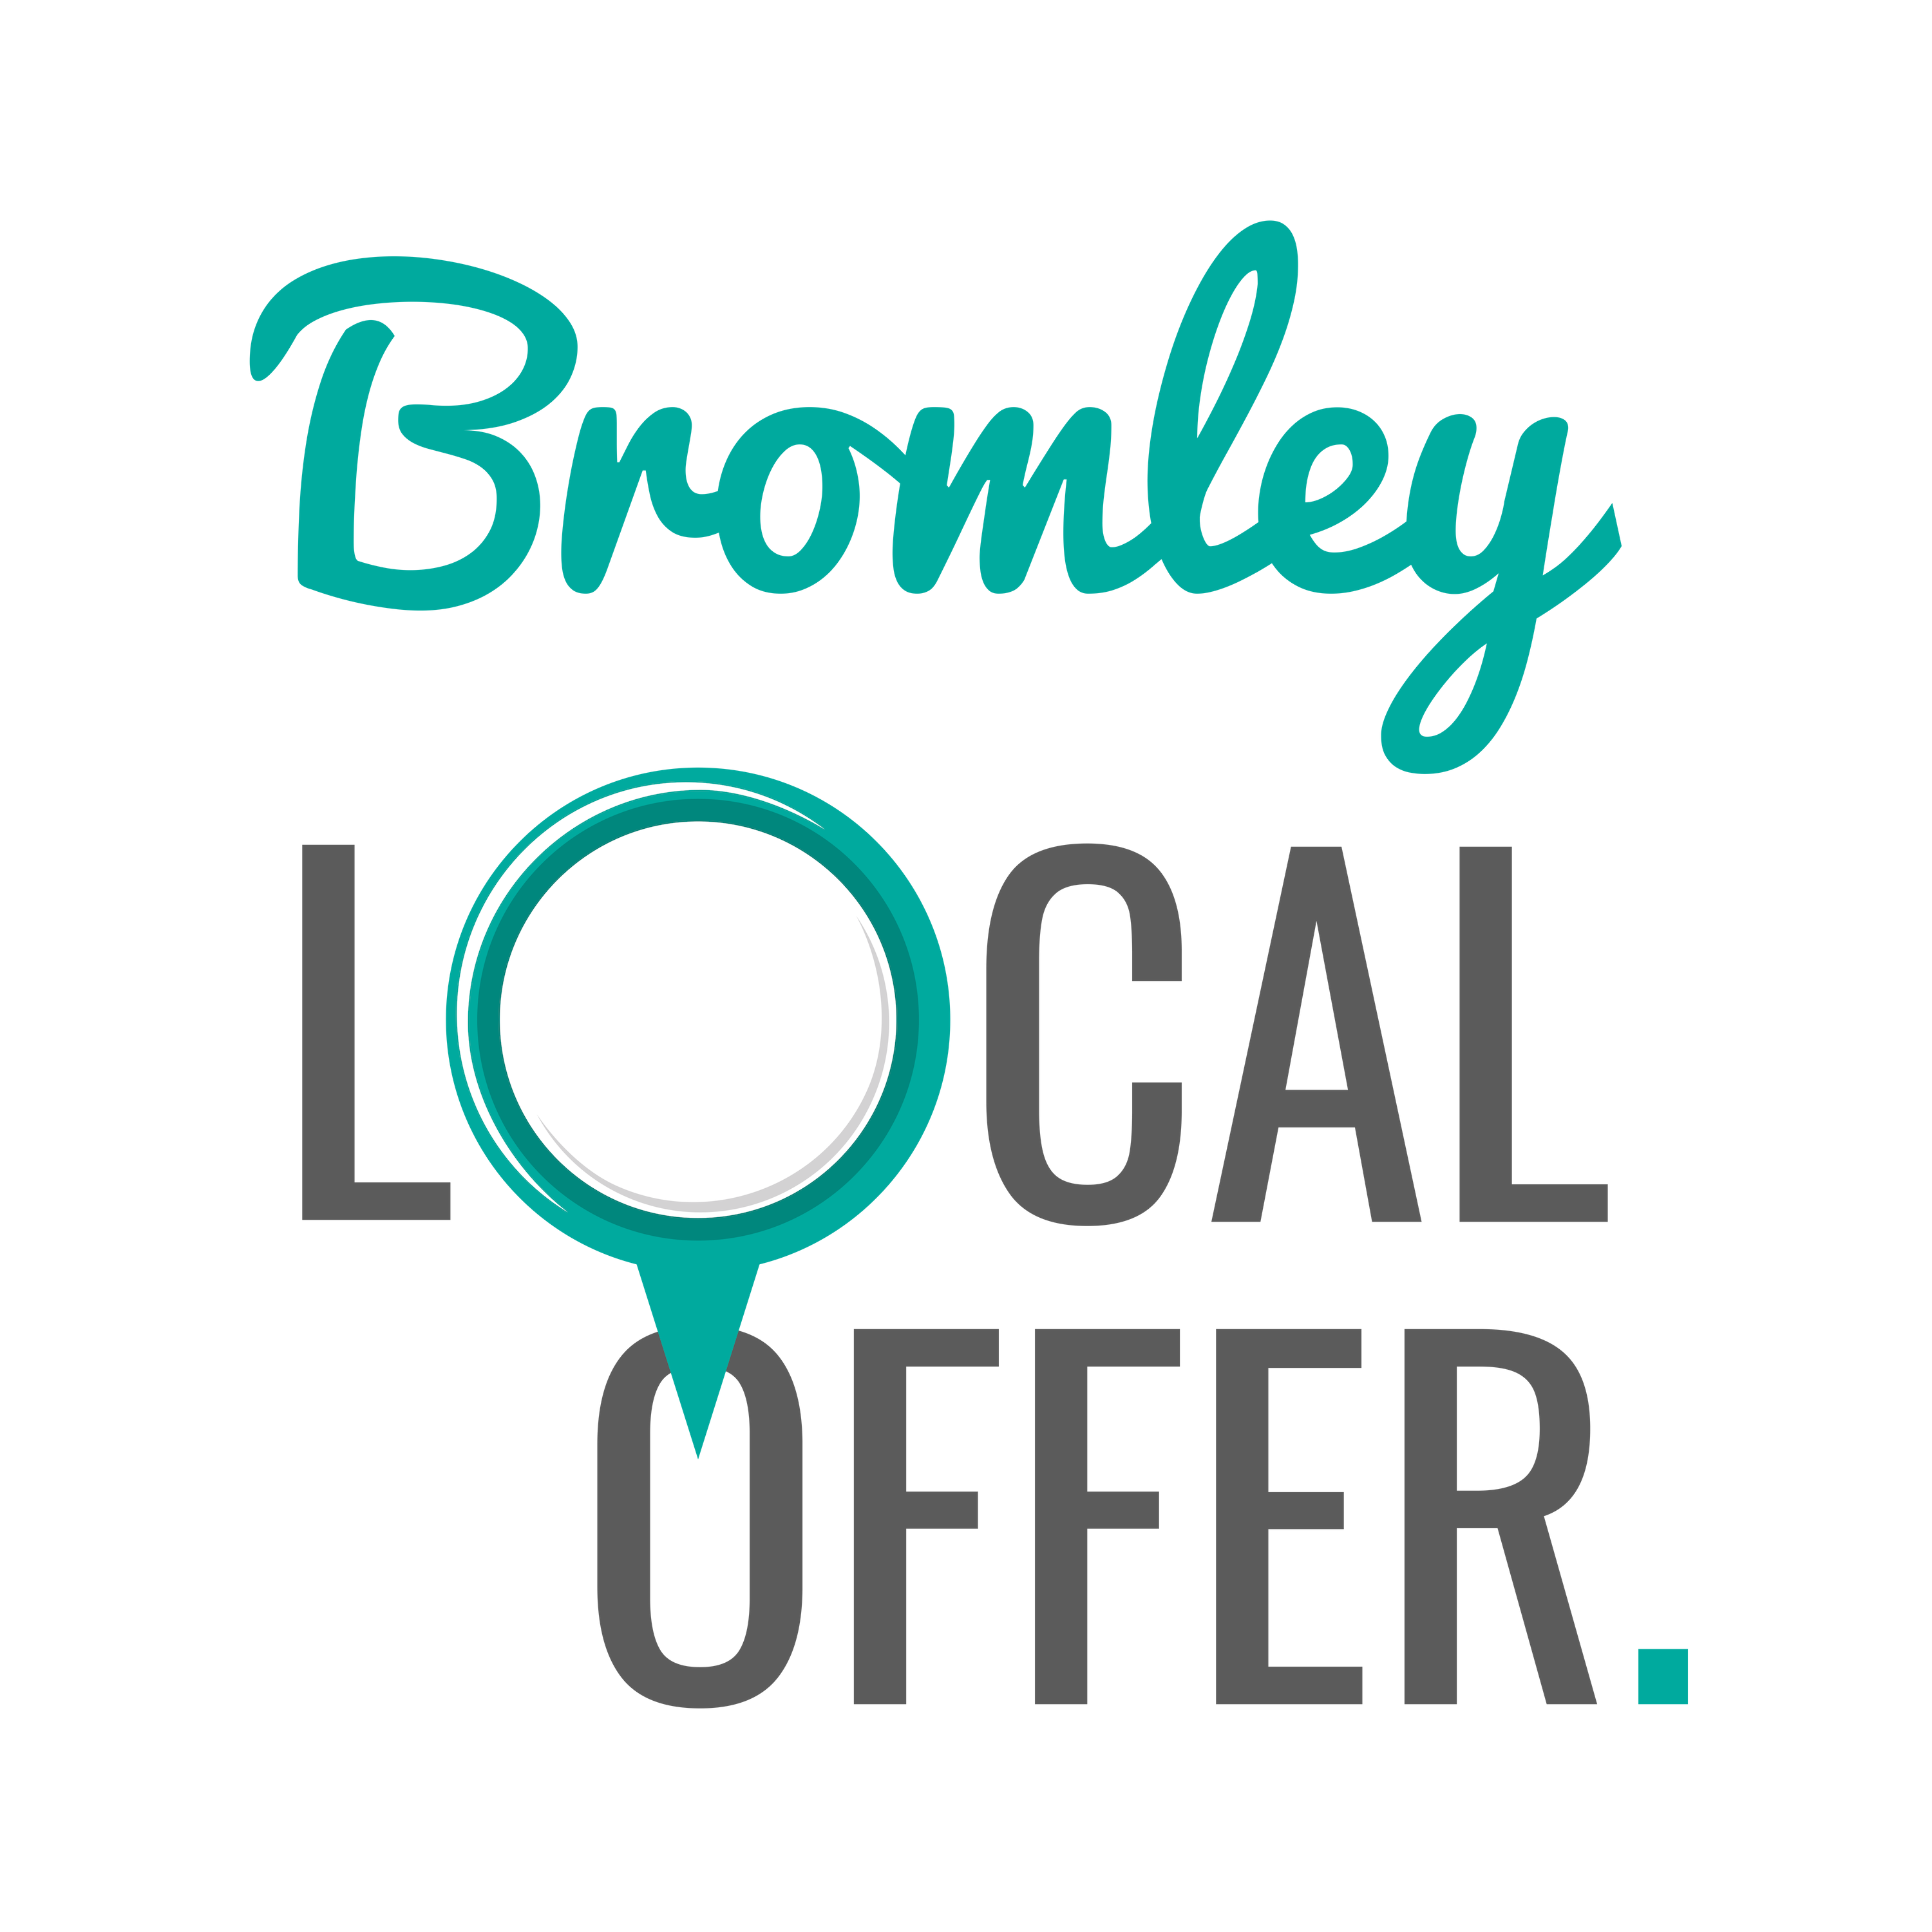 Bromley Local Offer